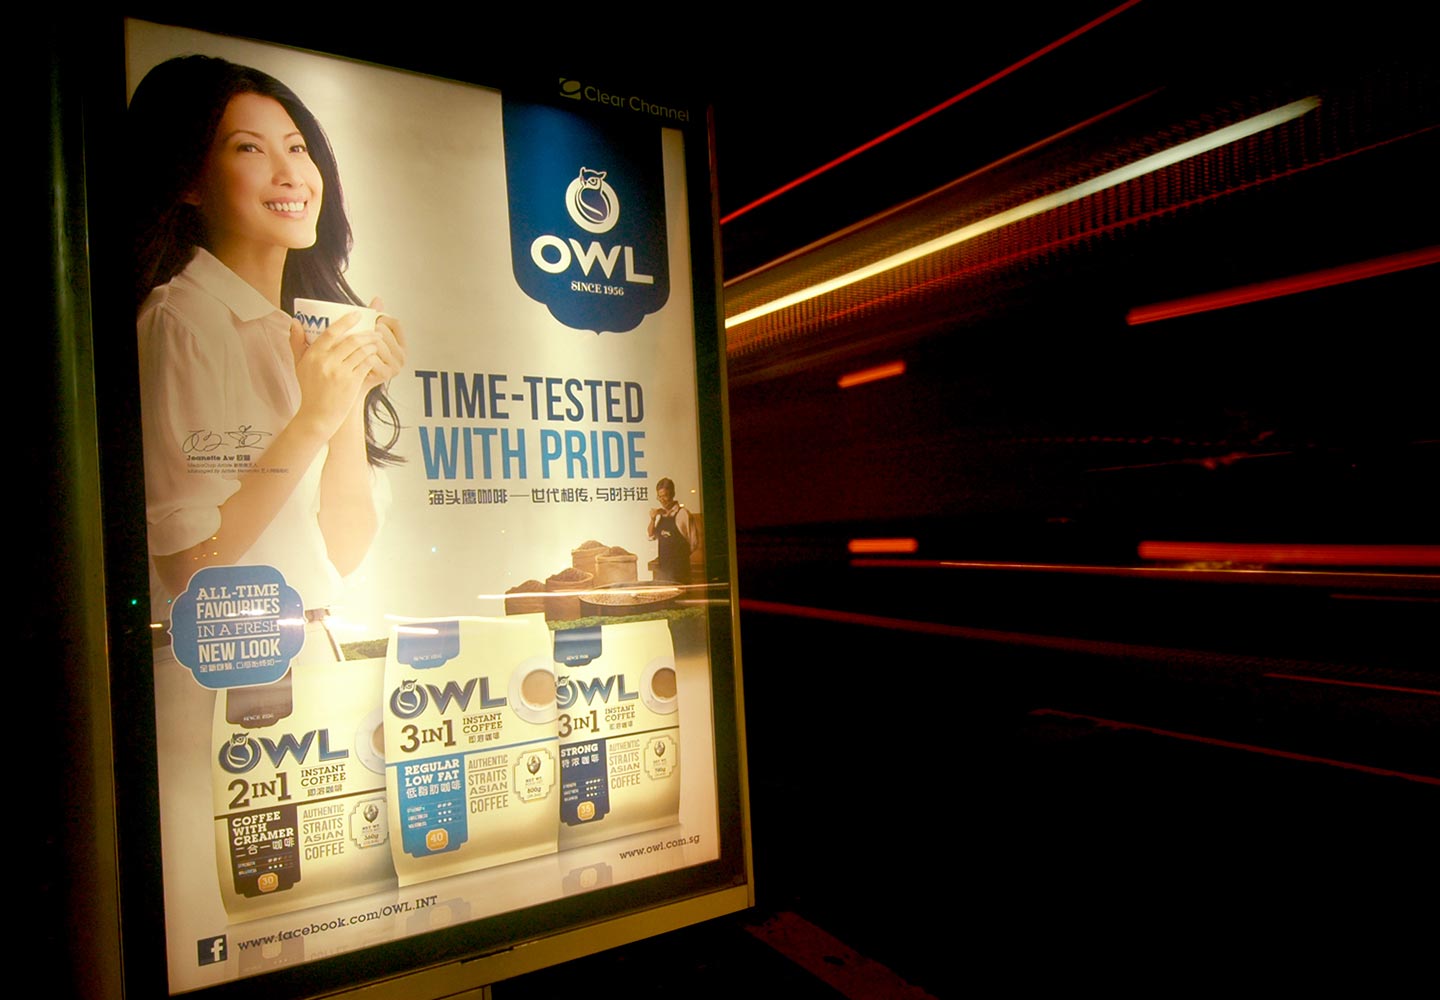 Brand Consultancy in FMCG Industry. Bus stop Ad for OWL.